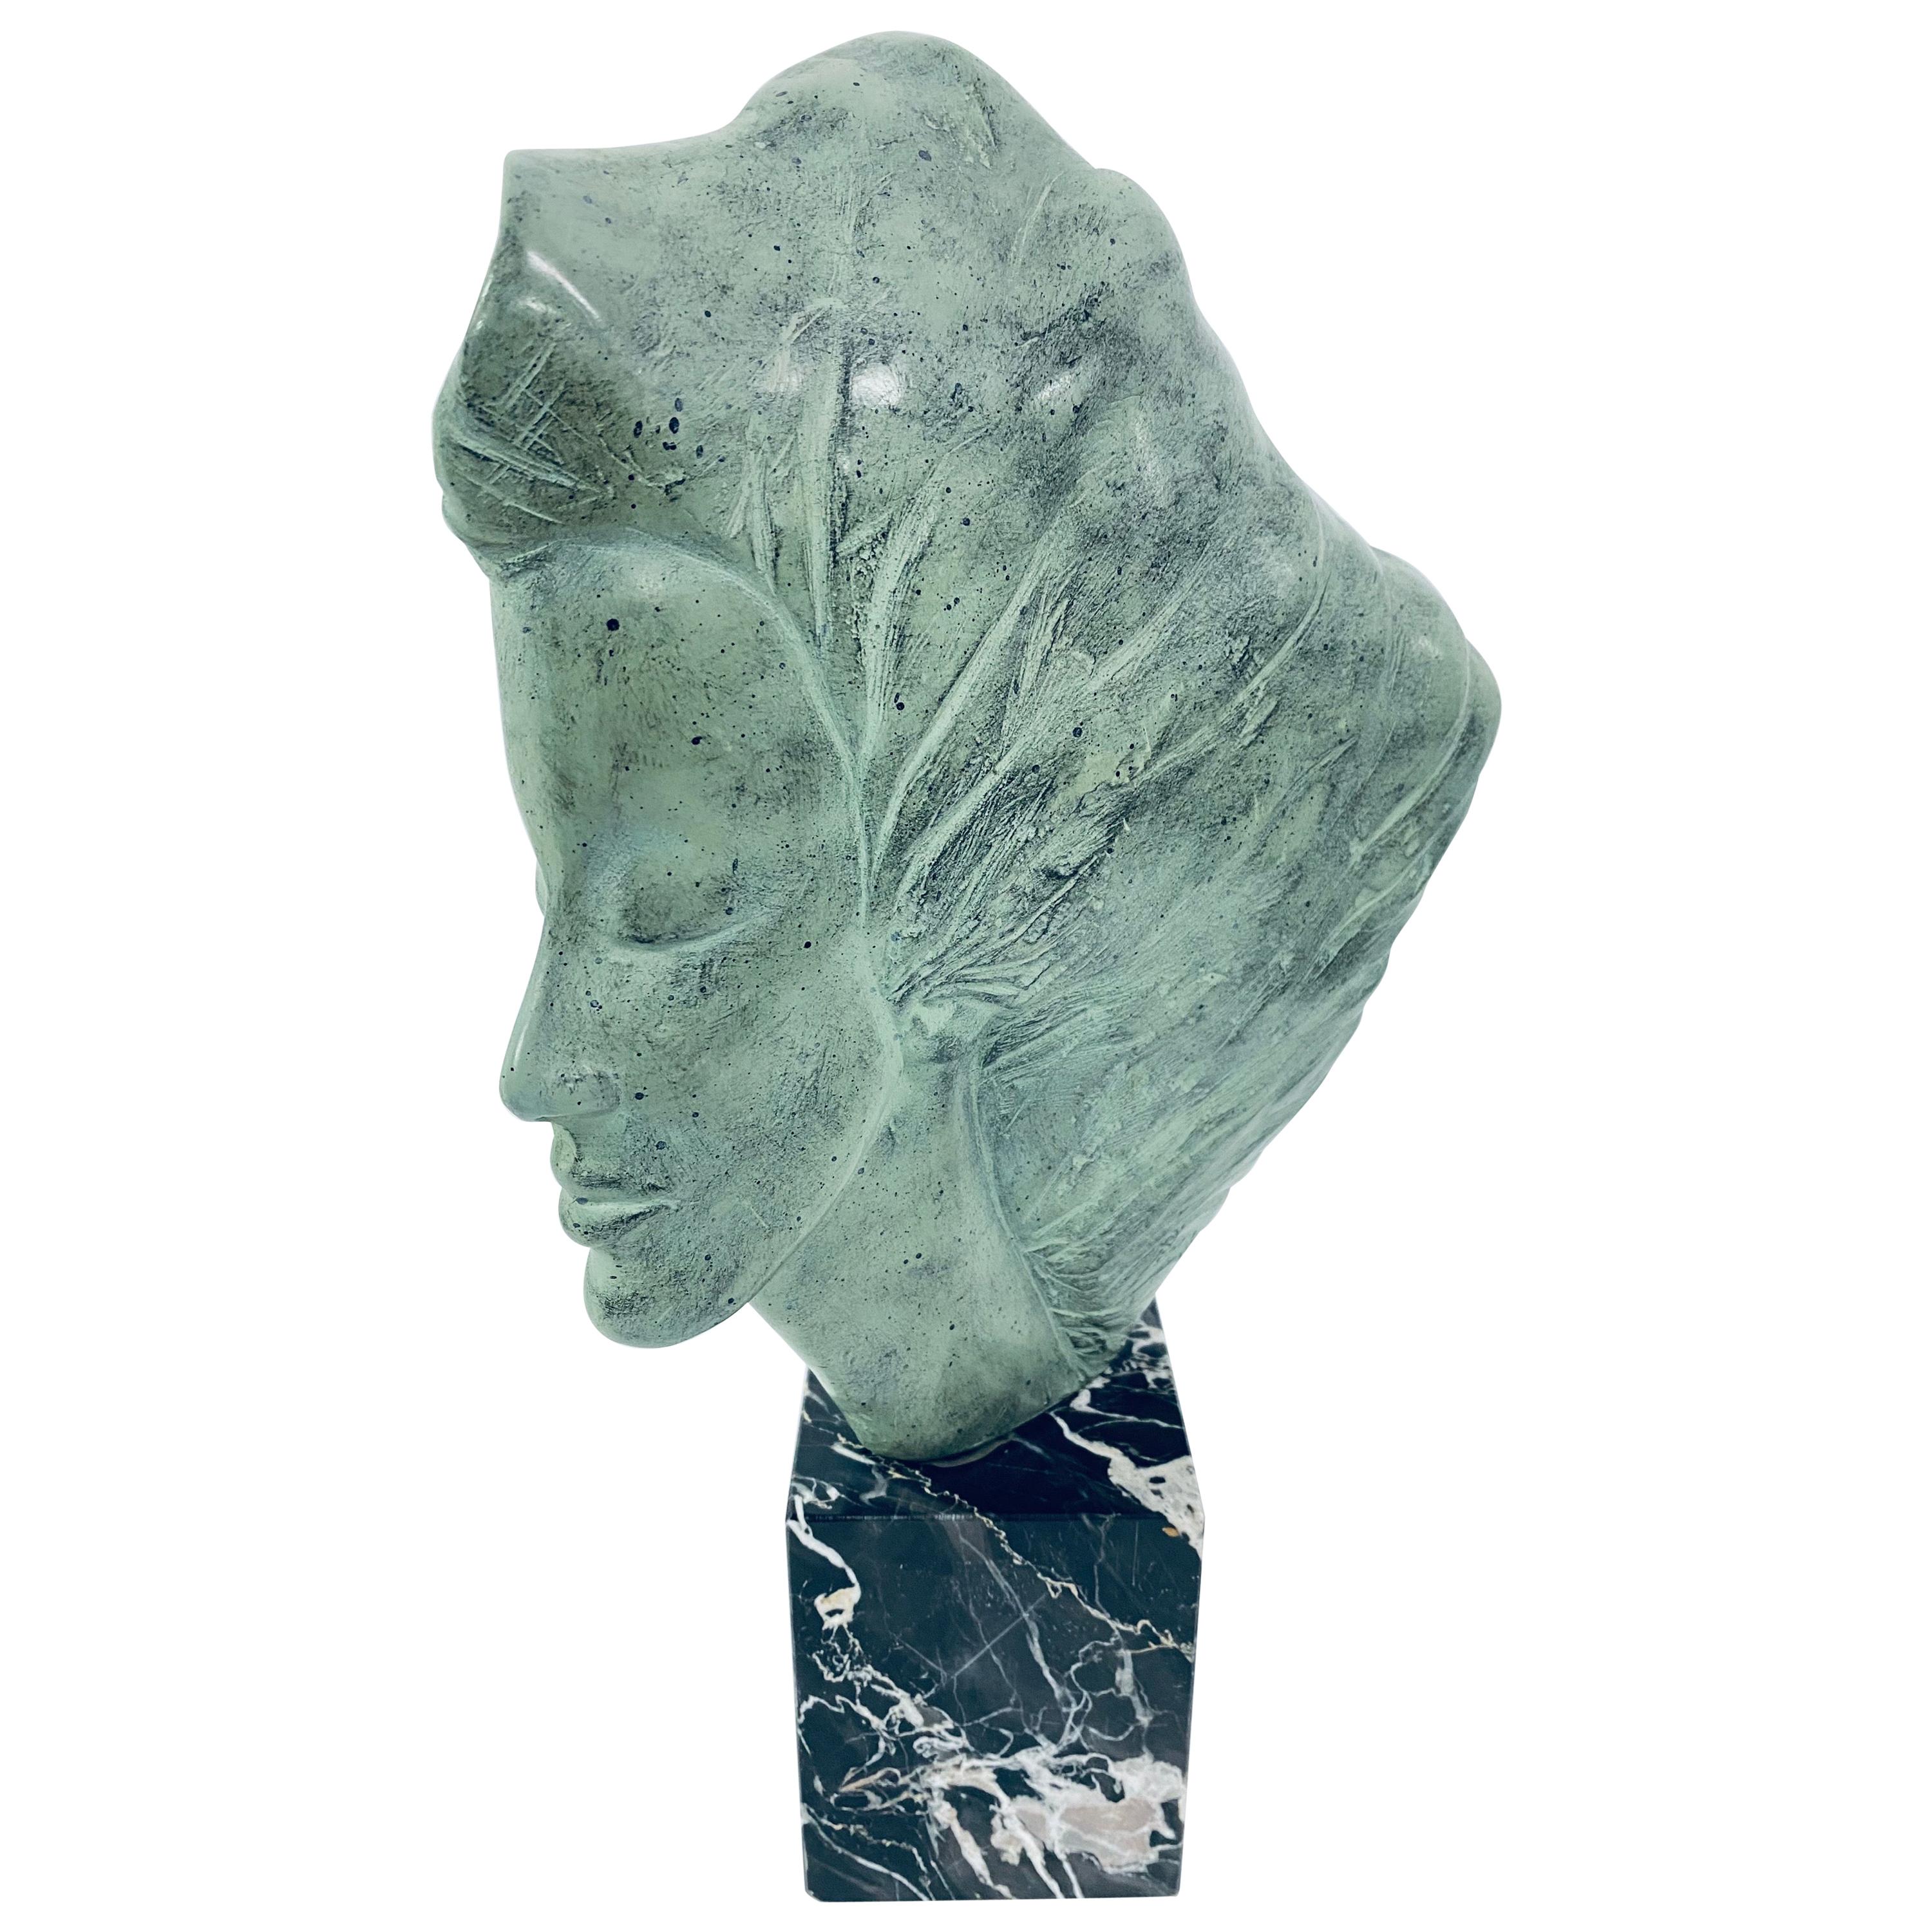 Midcentury Sculpted Resin Sculpture on Marble Base by Peggy March at 1stDibs